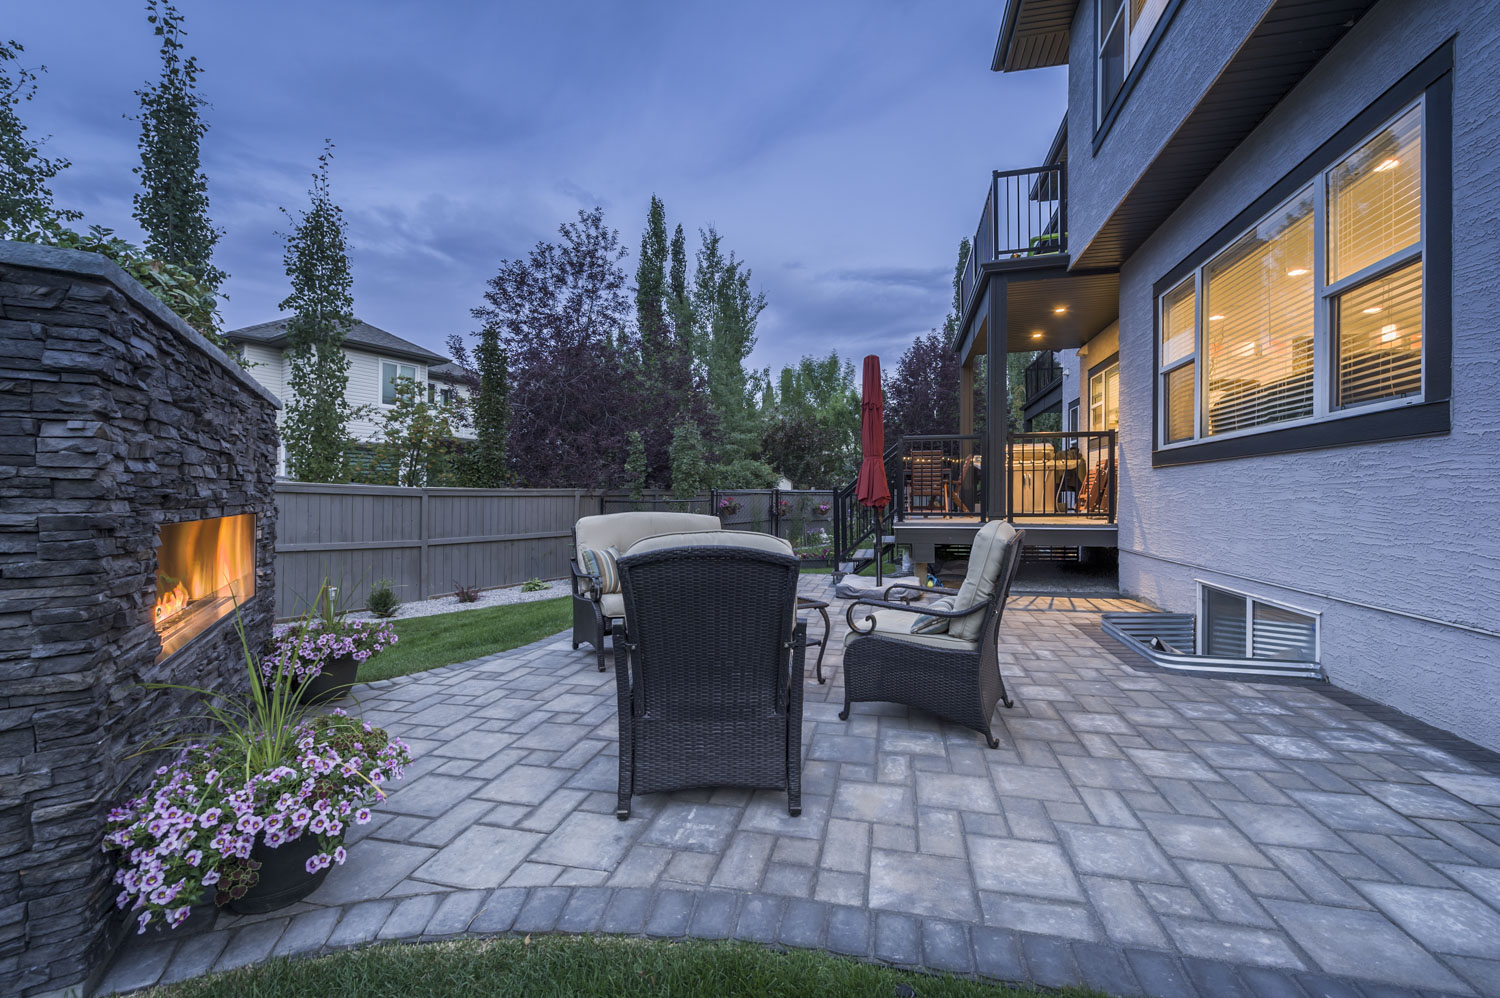 Patio At Night | Oasis Landscaping